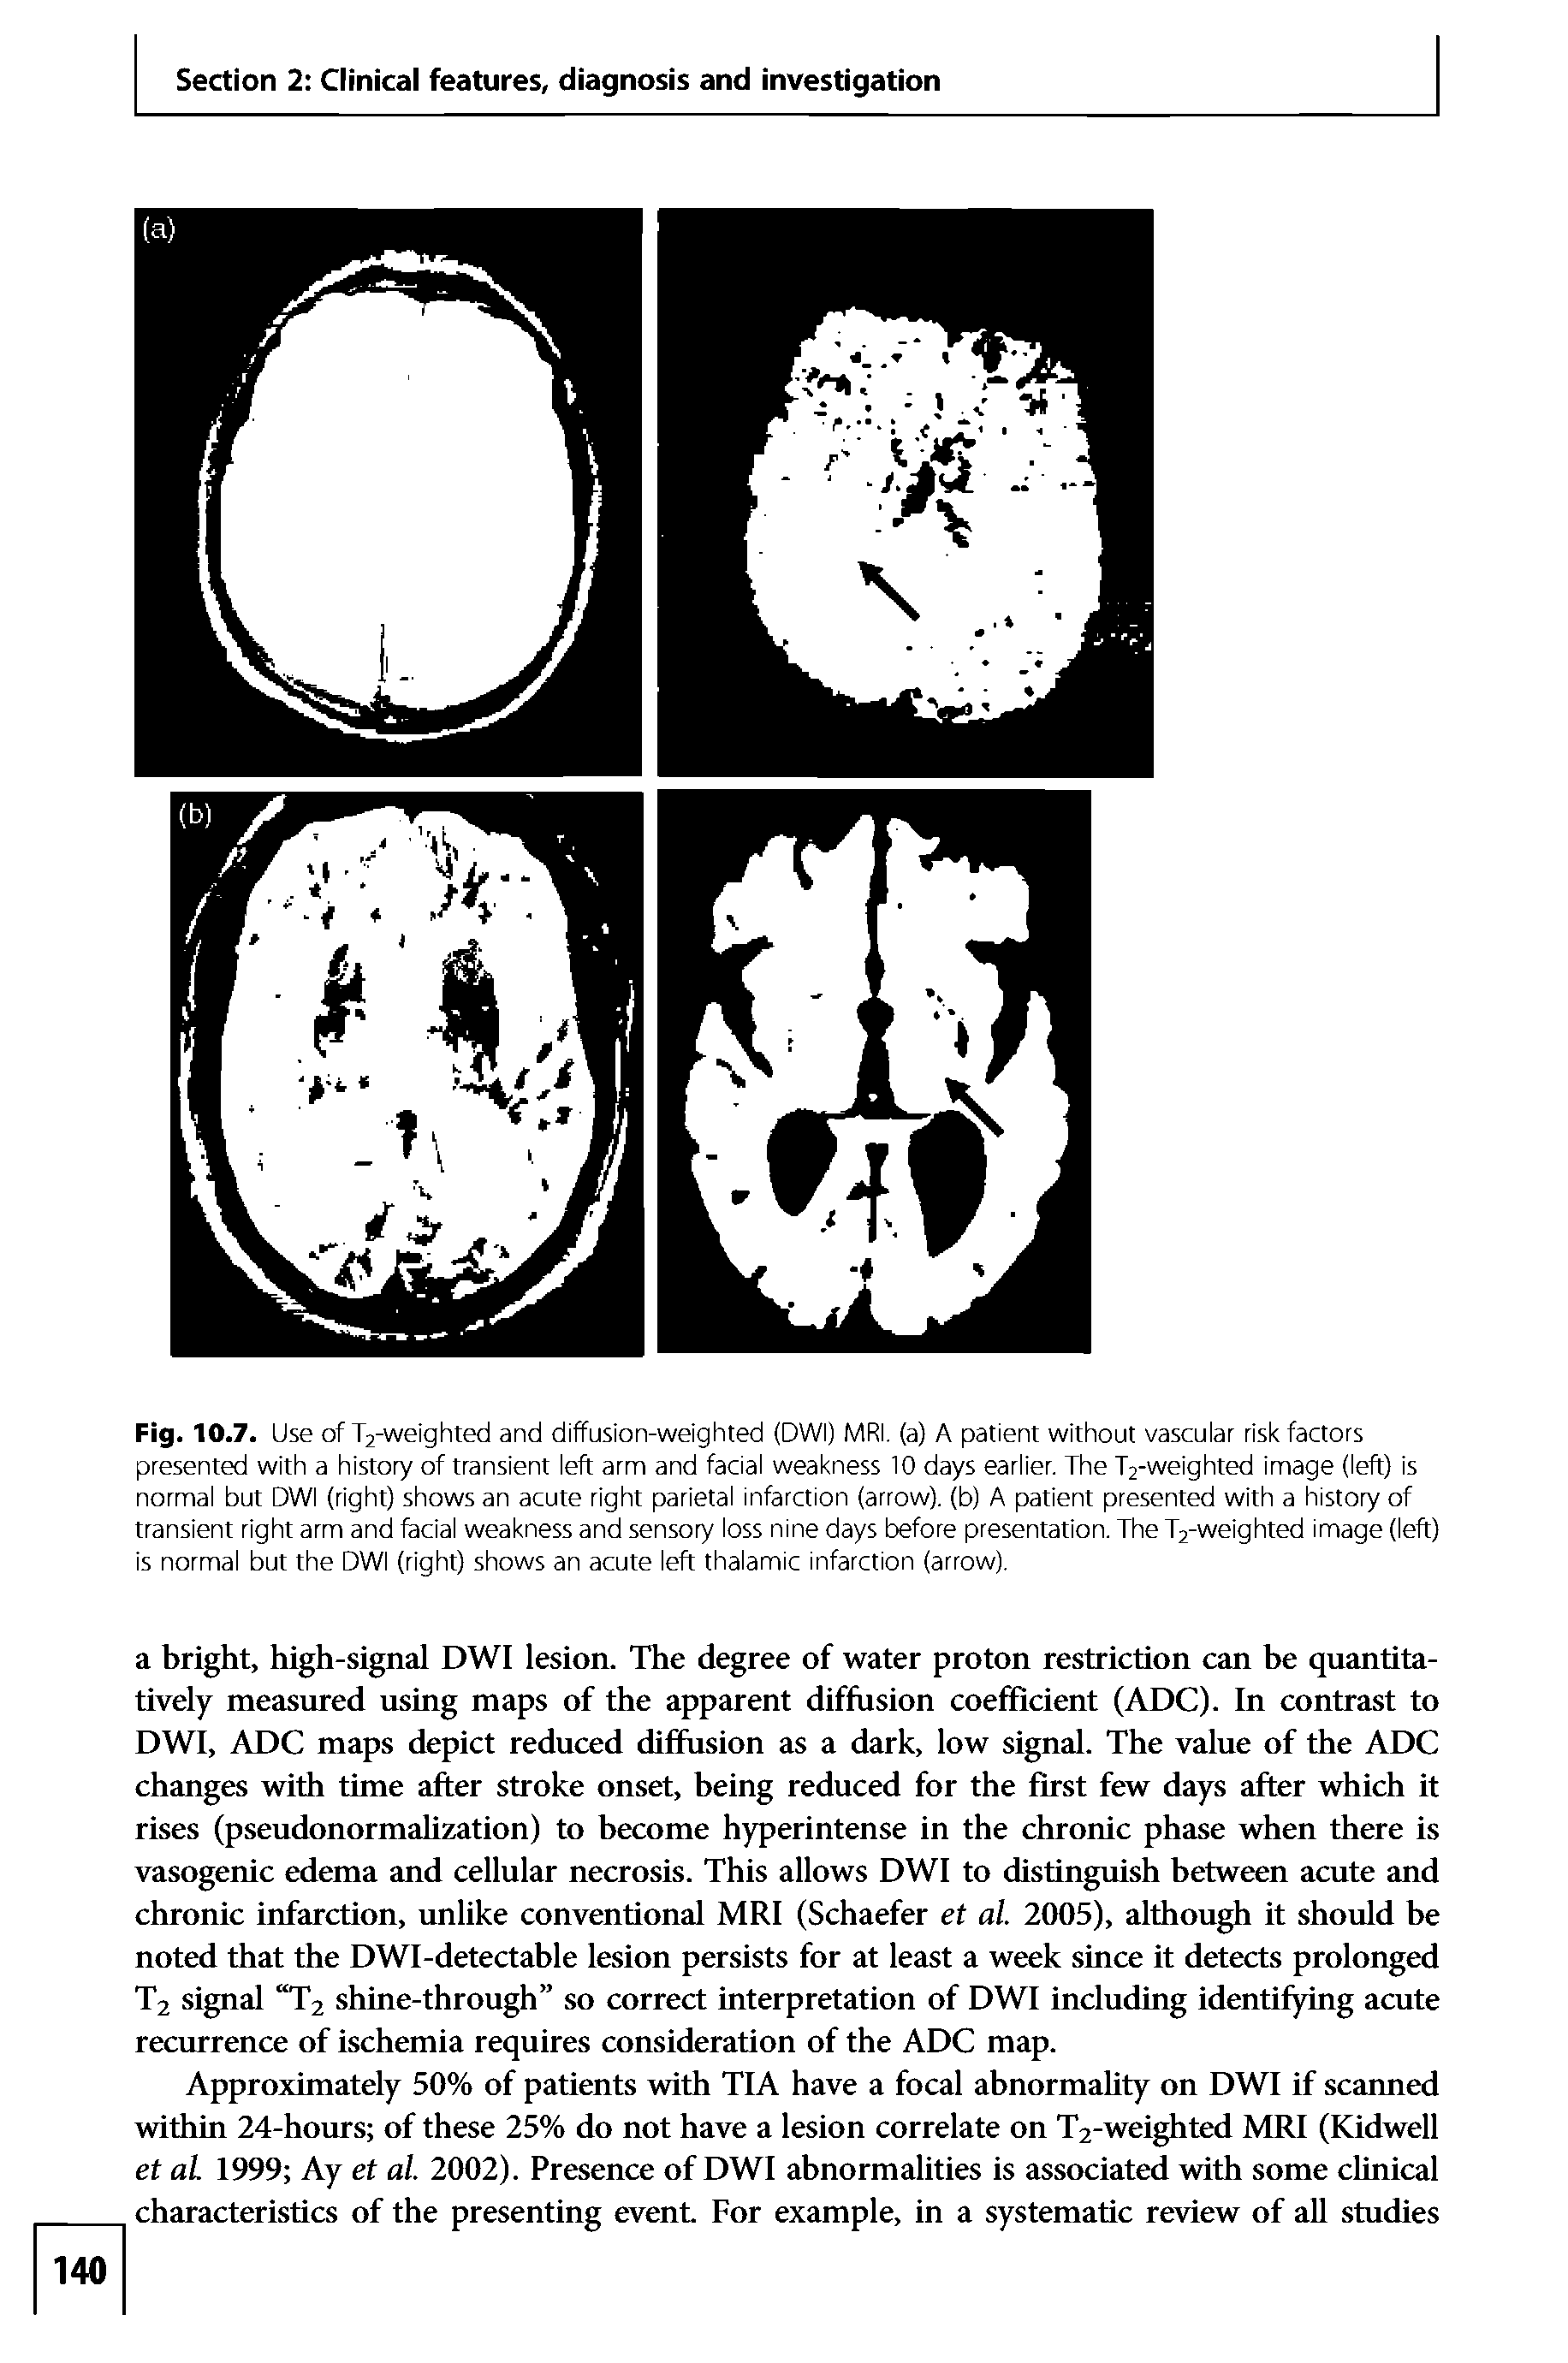 Fig. 10.7. Use of T2-weighted and diffusion-weighted (DWI) MRI. (a) A patient without vascular risk factors presented with a history of transient left arm and facial weakness 10 days earlier. The T2-weighted image (left) is normal but DWI (right) shows an acute right parietal infarction (arrow), (b) A patient presented with a history of transient right arm and facial weakness and sensory loss nine days before presentation. The T2-weighted image (left) is normal but the DWI (right) shows an acute left thalamic infarction (arrow).